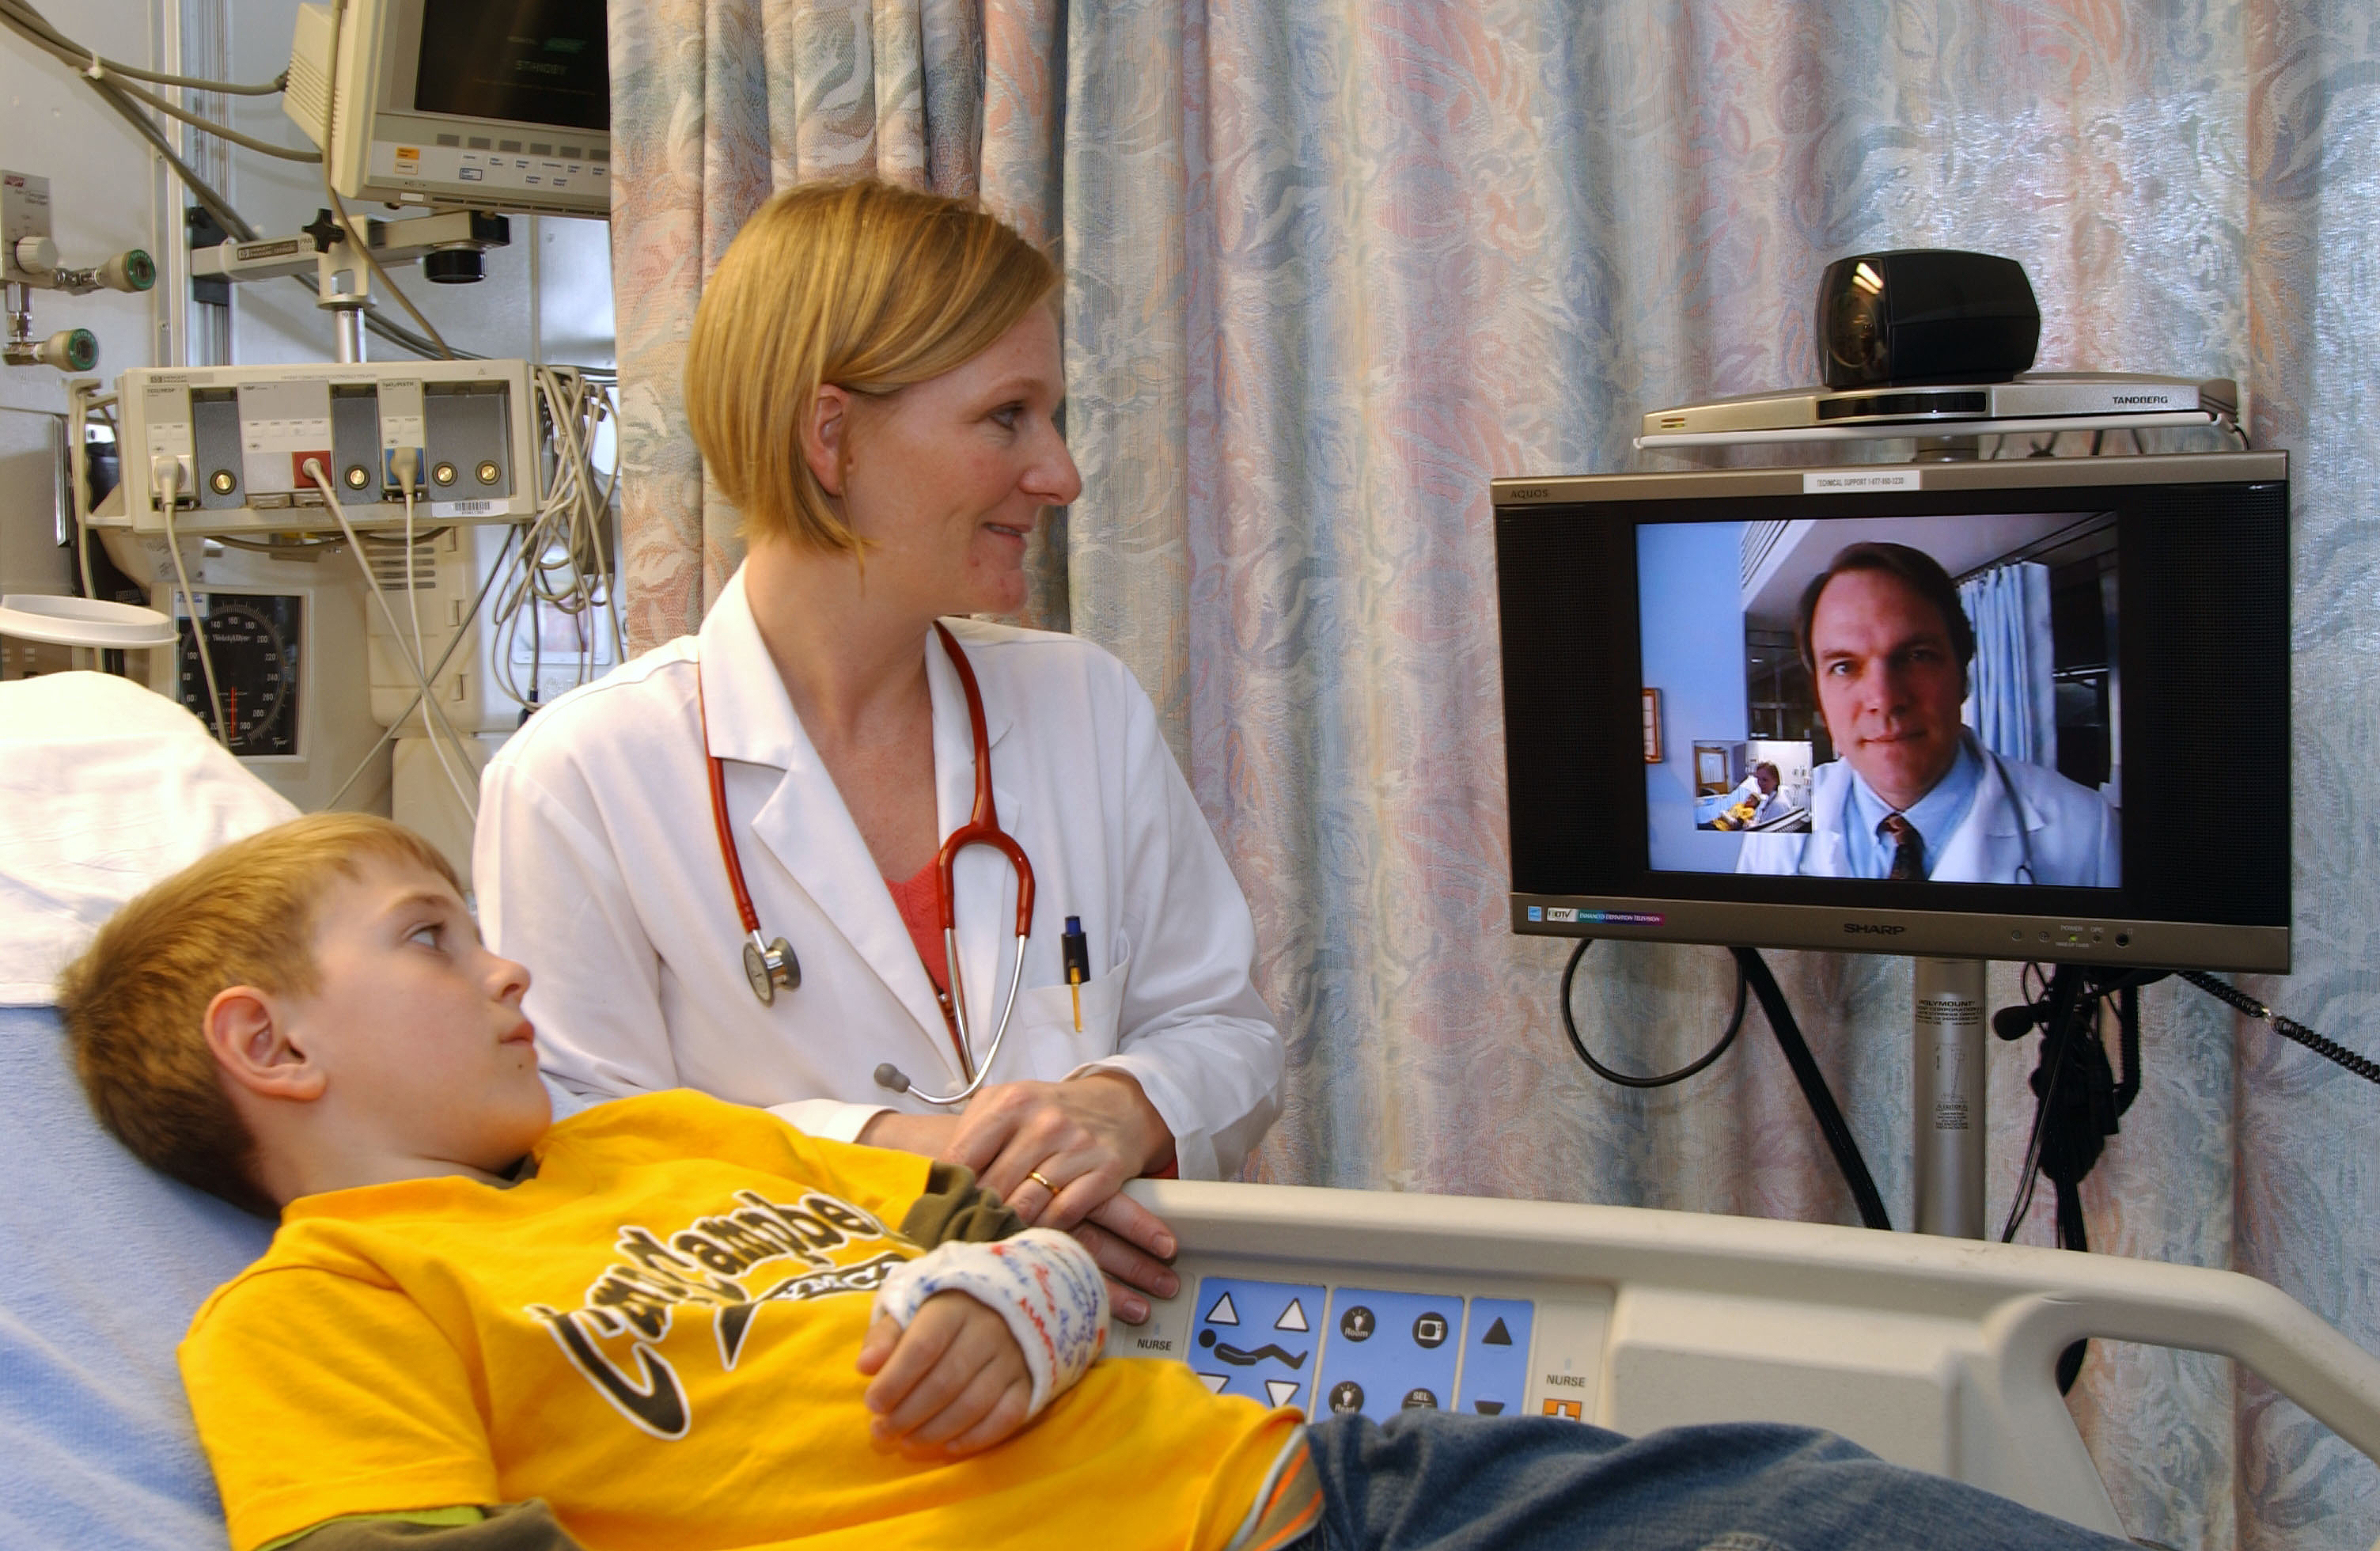 Figure1A - An example of a Teleconsultation. A physician at the distant hospital consults with a subspecialist, over a secure video connection, on the treatment of a child. 